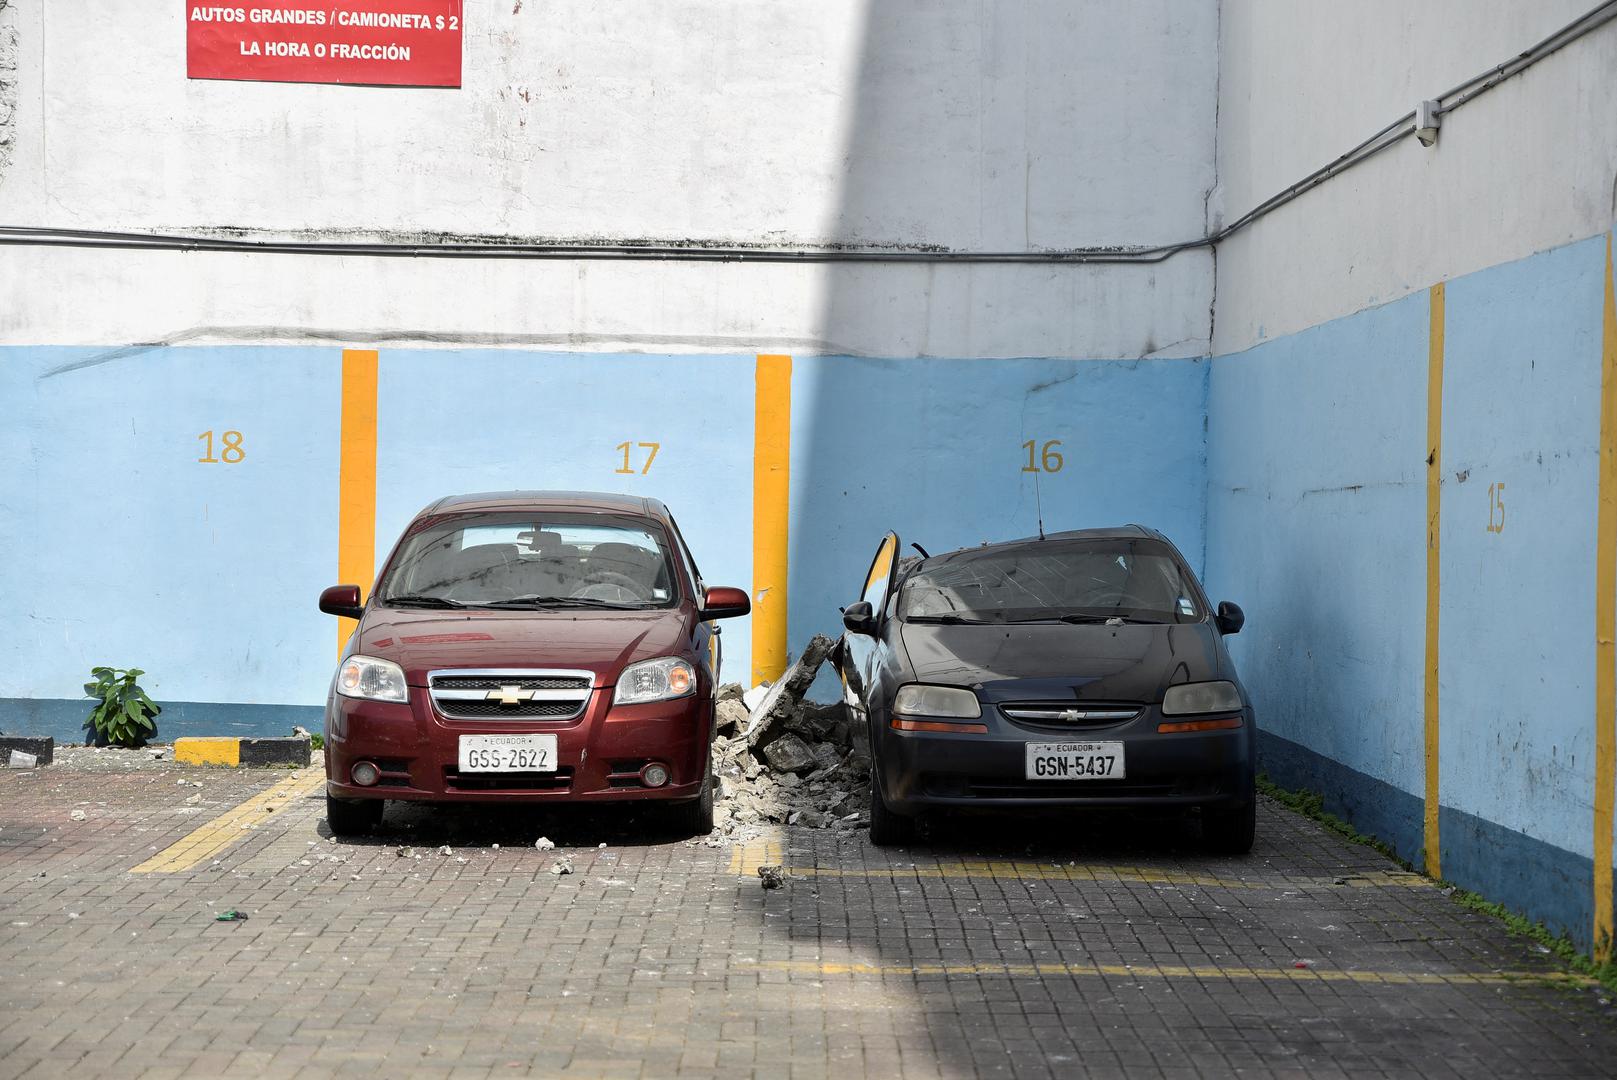 Damaged cars are pictured following an earthquake in Guayaquil, Ecuador March 18, 2023. REUTERS/Vicente Gaibor Del Pino Photo: VICENTE GAIBOR DEL PINO/REUTERS